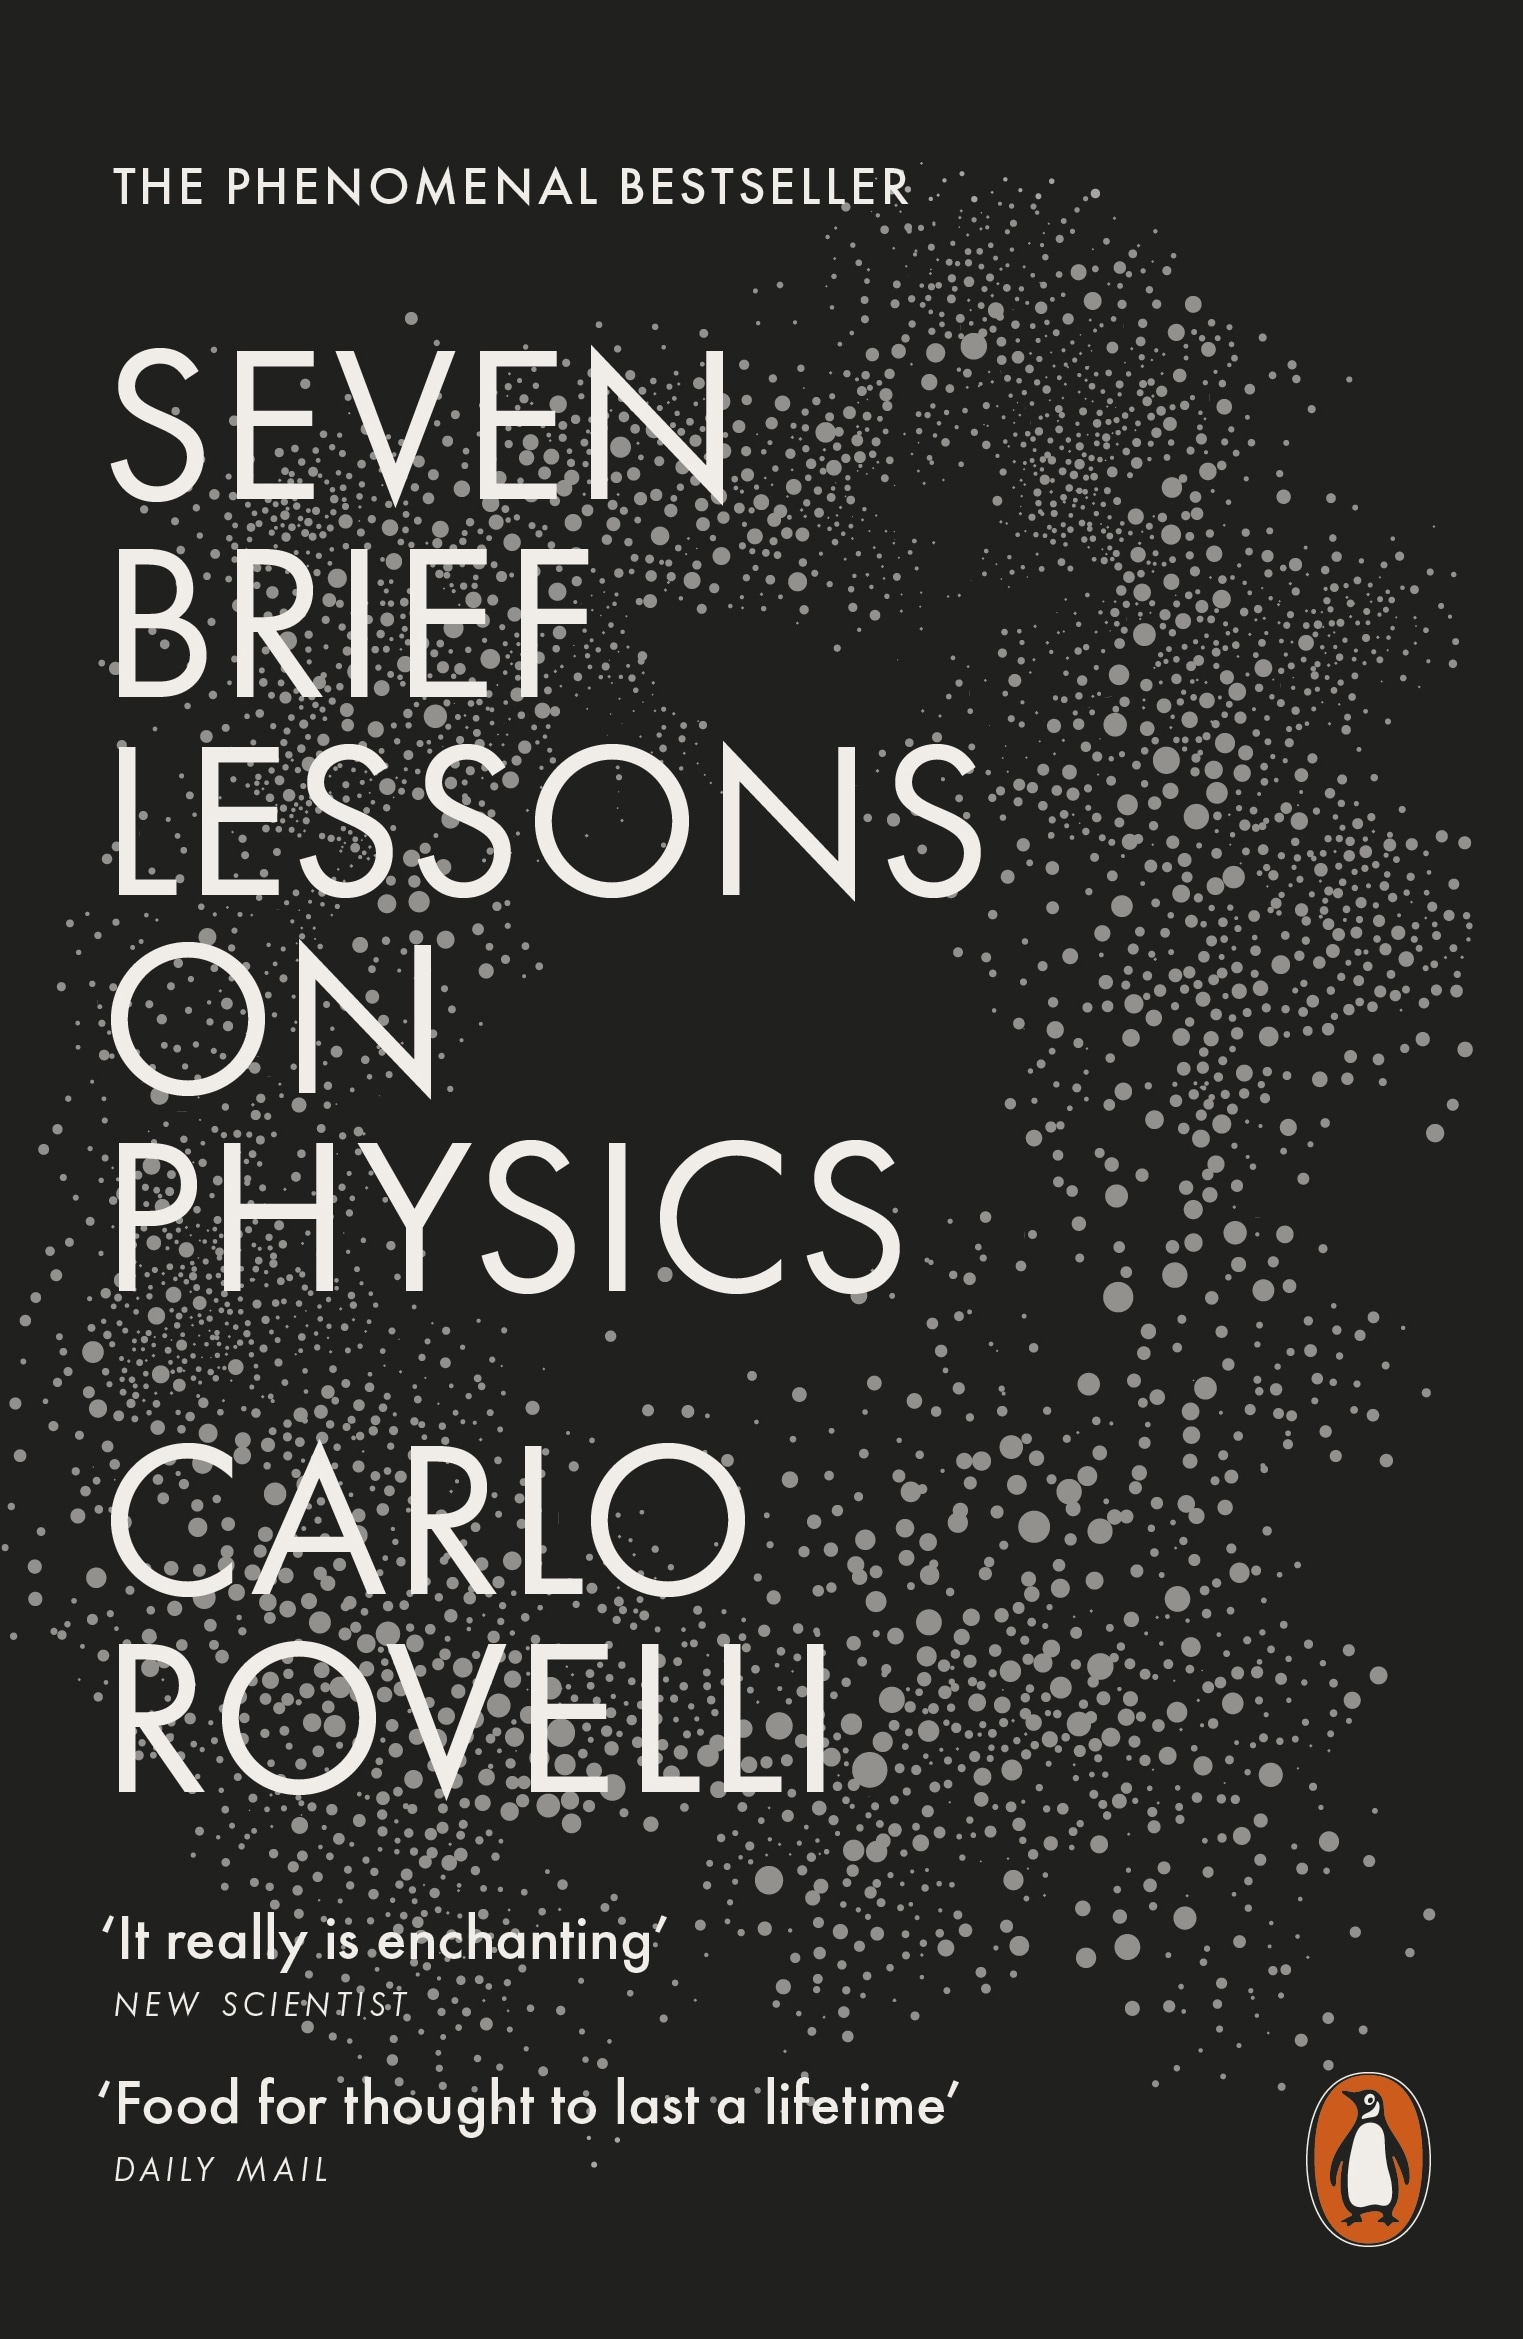 Book “Seven Brief Lessons on Physics” by Carlo Rovelli — June 30, 2016